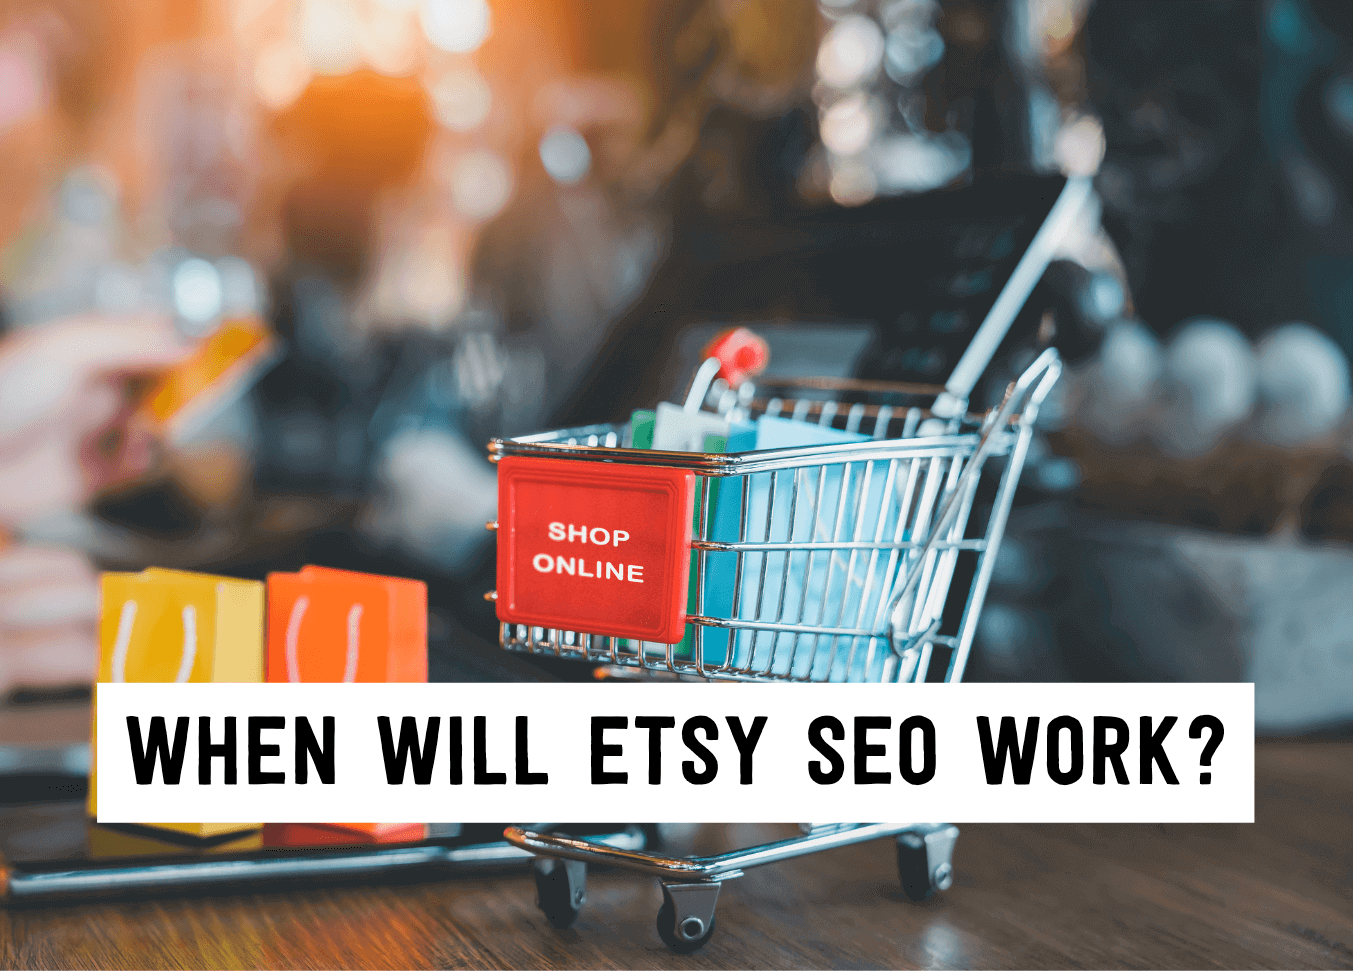 When will etsy seo work? | Tizzit.co - start and grow a successful handmade business